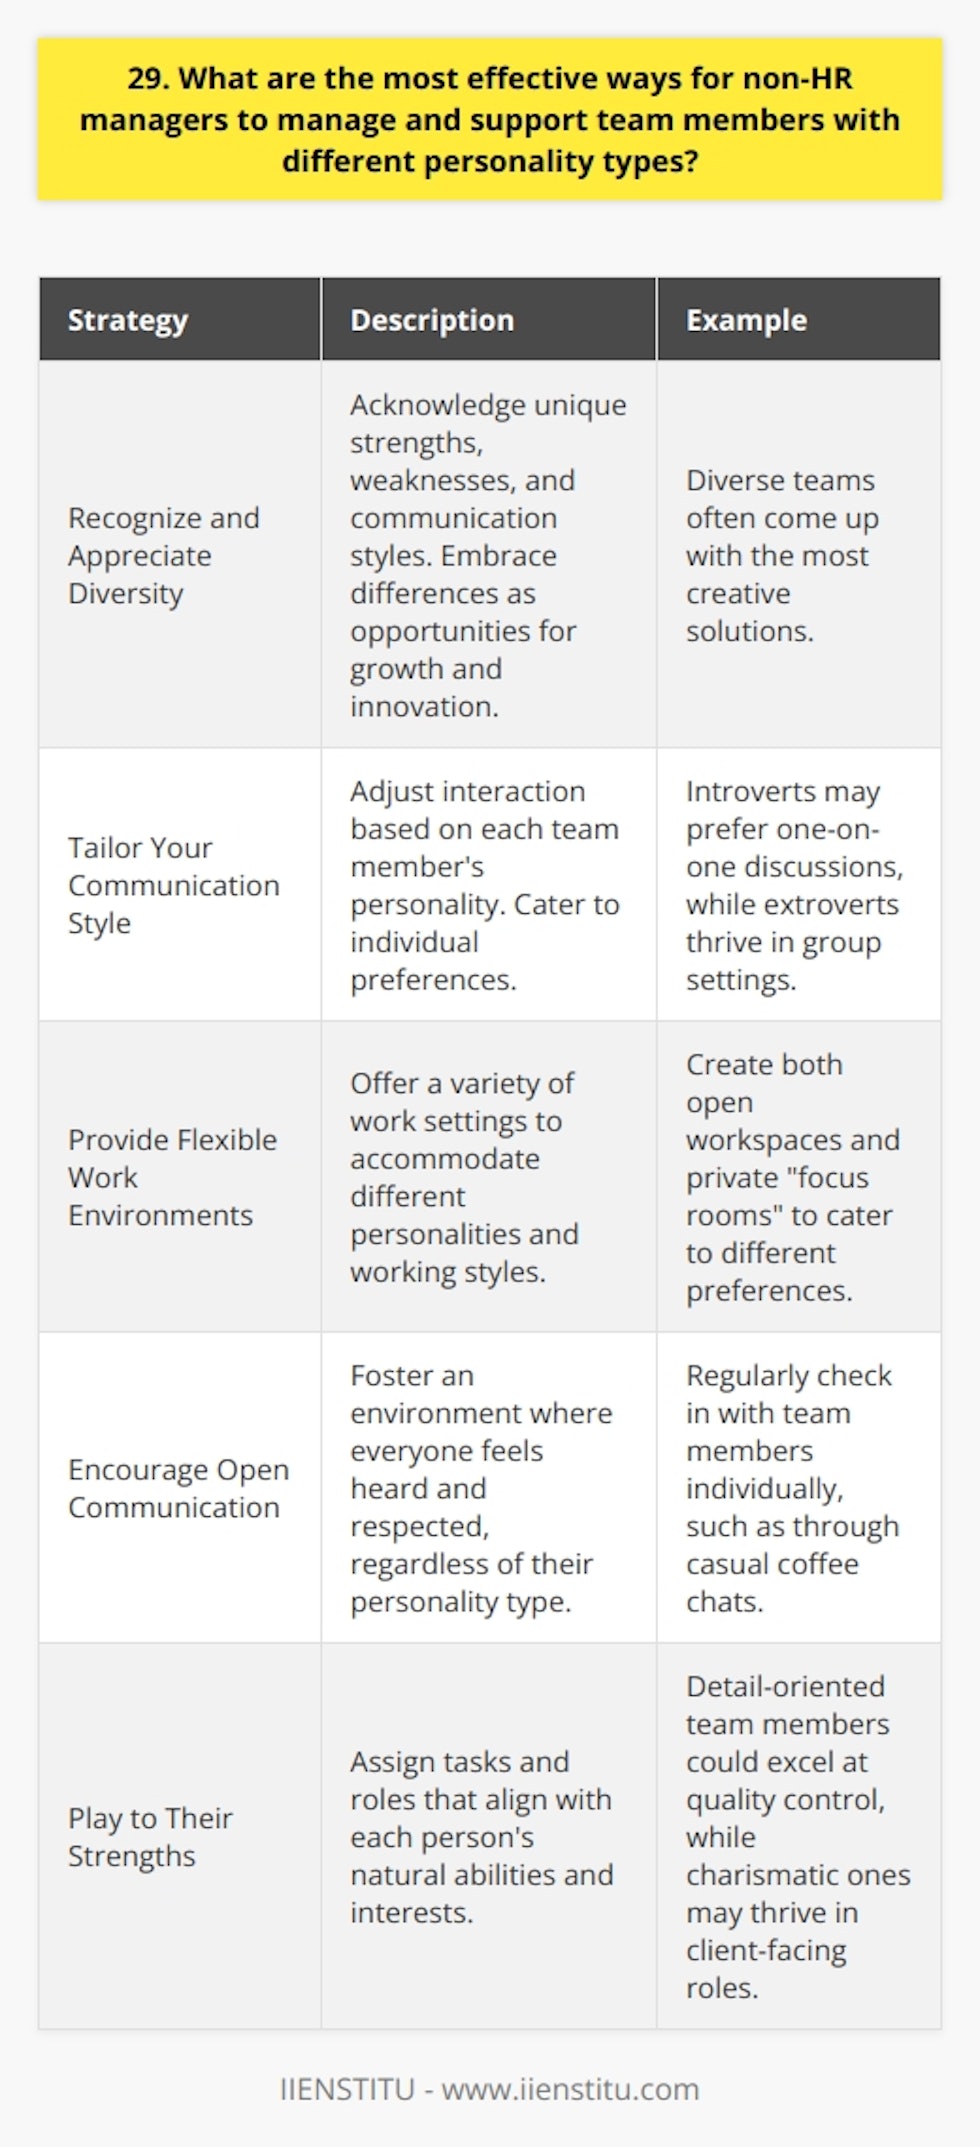 As a manager, understanding and adapting to different personality types is crucial for effective team management. Here are some strategies Ive found useful: Recognize and Appreciate Diversity Acknowledge that everyone has unique strengths, weaknesses, and communication styles. Embrace these differences as opportunities for growth and innovation. In my experience, diverse teams often come up with the most creative solutions. Tailor Your Communication Style Adjust how you interact with each team member based on their personality. For example, introverts may prefer one-on-one discussions, while extroverts thrive in group settings. I once had a quiet but brilliant developer who shared amazing ideas during our private chats. Provide Flexible Work Environments Some people work best in collaborative spaces, others need quiet focus zones. Offer a variety of work settings if possible. In my previous role, we created both open workspaces and private  focus rooms  to cater to different preferences. Encourage Open Communication Foster an environment where everyone feels heard and respected, regardless of their personality type. Regularly check in with your team members individually. I make it a point to have casual coffee chats with each person at least once a month. Play to Their Strengths Assign tasks and roles that align with each persons natural abilities and interests. A detail-oriented team member could excel at quality control, while a charismatic one may thrive in client-facing roles. I love seeing my team members shine in their element! Remember, theres no one-size-fits-all approach to managing personalities. The key is being adaptable, empathetic, and genuinely invested in your teams success.